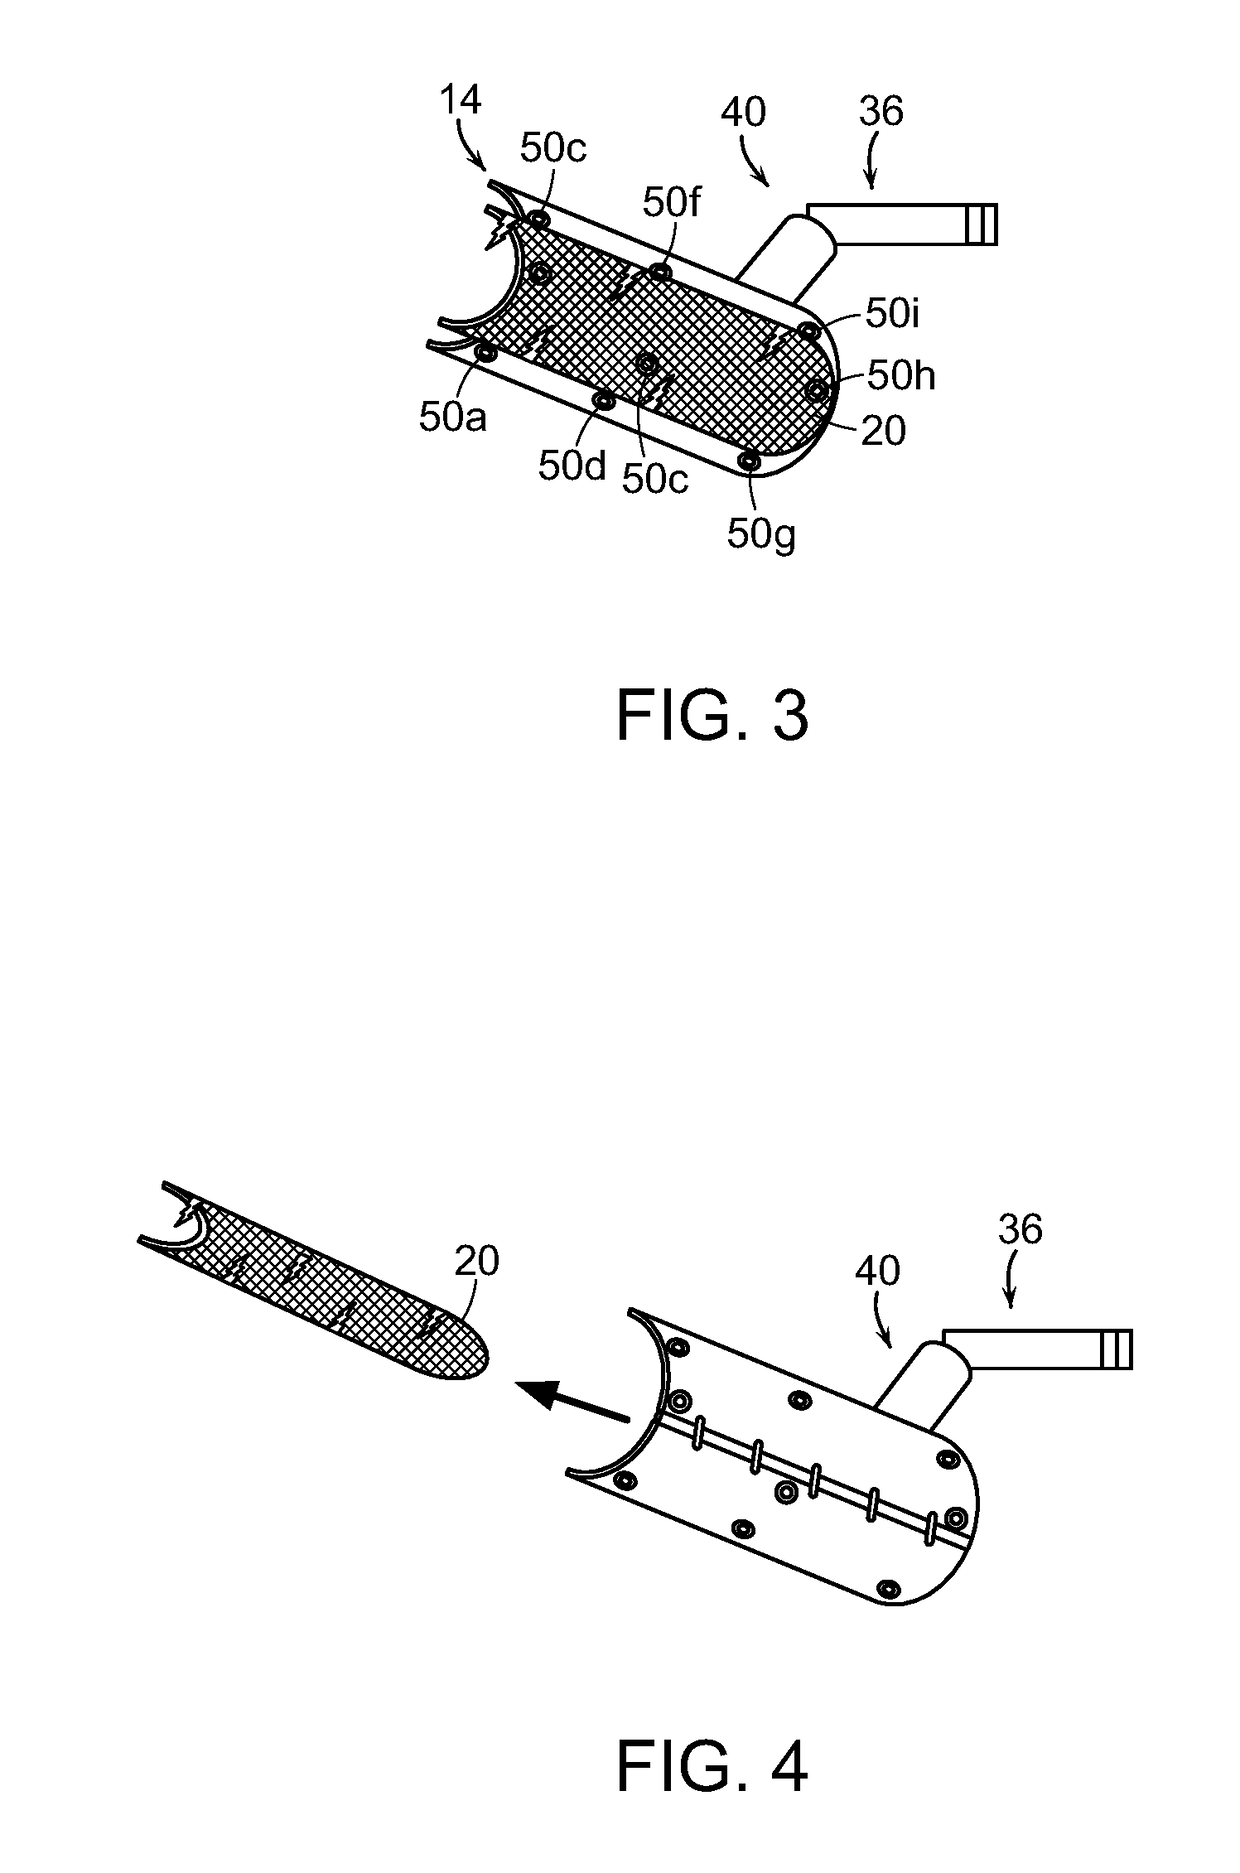 Delivery system for positioning and affixing surgical mesh or surgical buttress covering a surgical margin